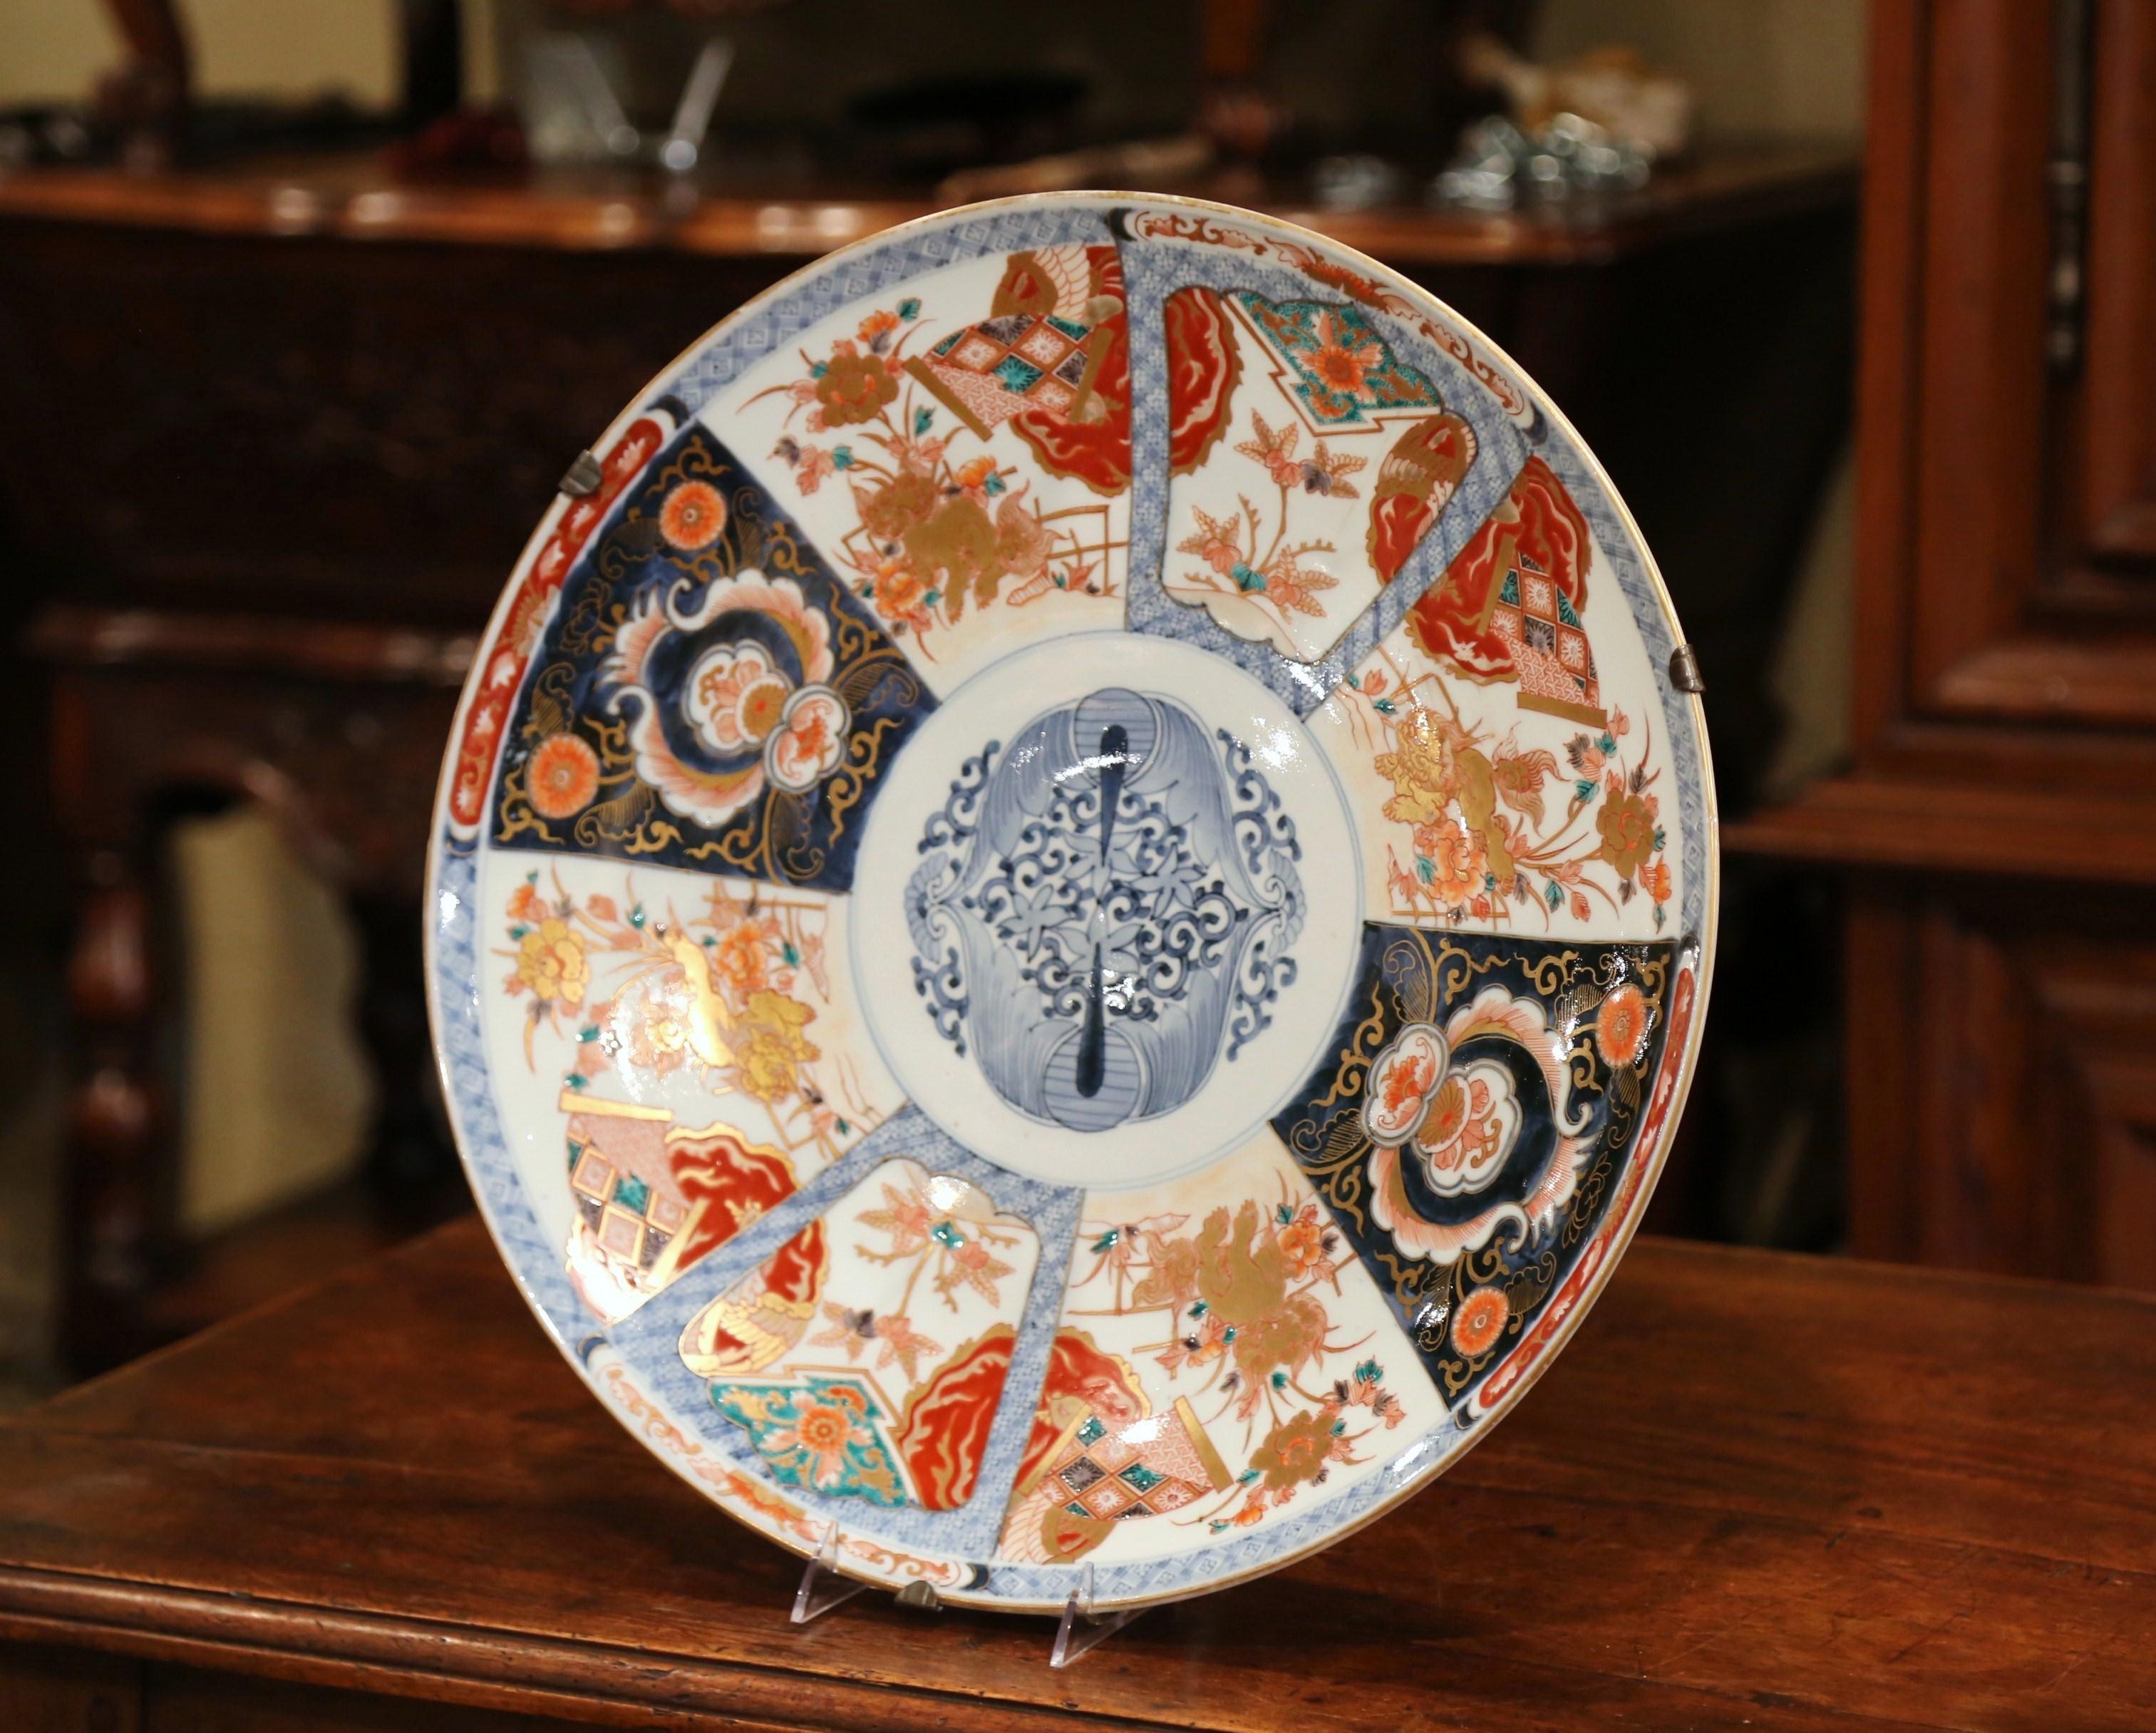 Decorate a wall with this large, porcelain Imari import charger. Crafted in Japan circa 1890, the important Asian ceramic platter features hand painted floral decor with gilt accents. The exotic charger is in excellent condition and has rich,